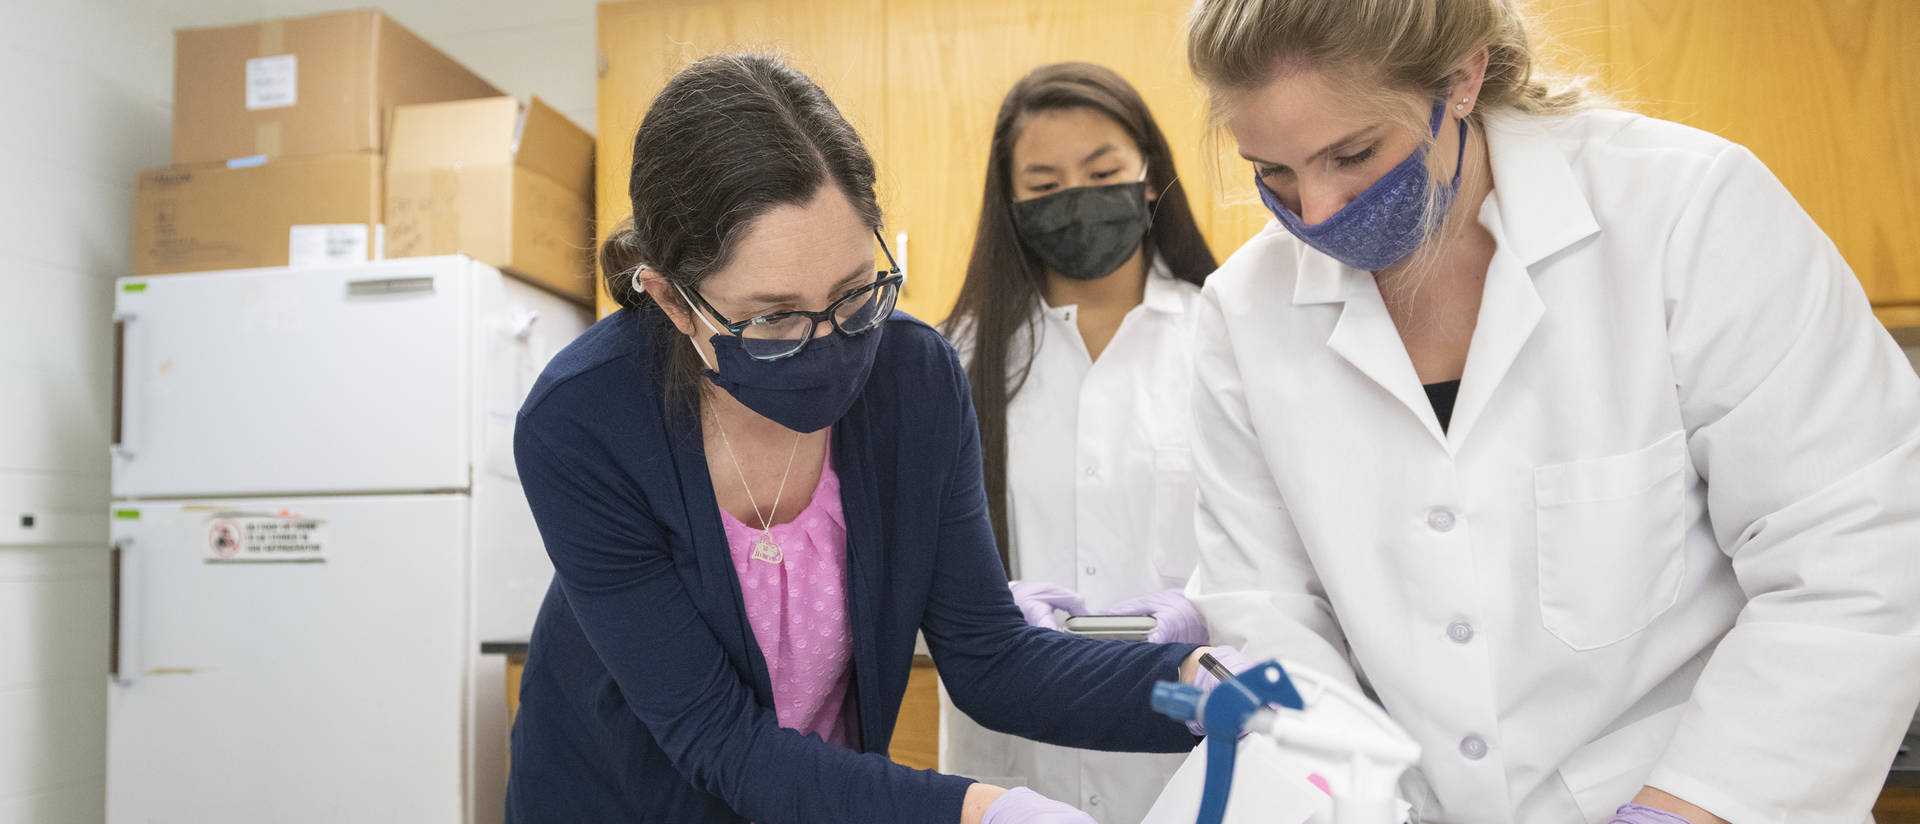 Dr. Jamie Lyman Gingerich, a UW-Eau Claire associate professor of biology, works in a Phillips Hall laboratory with students Kati Sadowska, center, and Caterra Leavens.